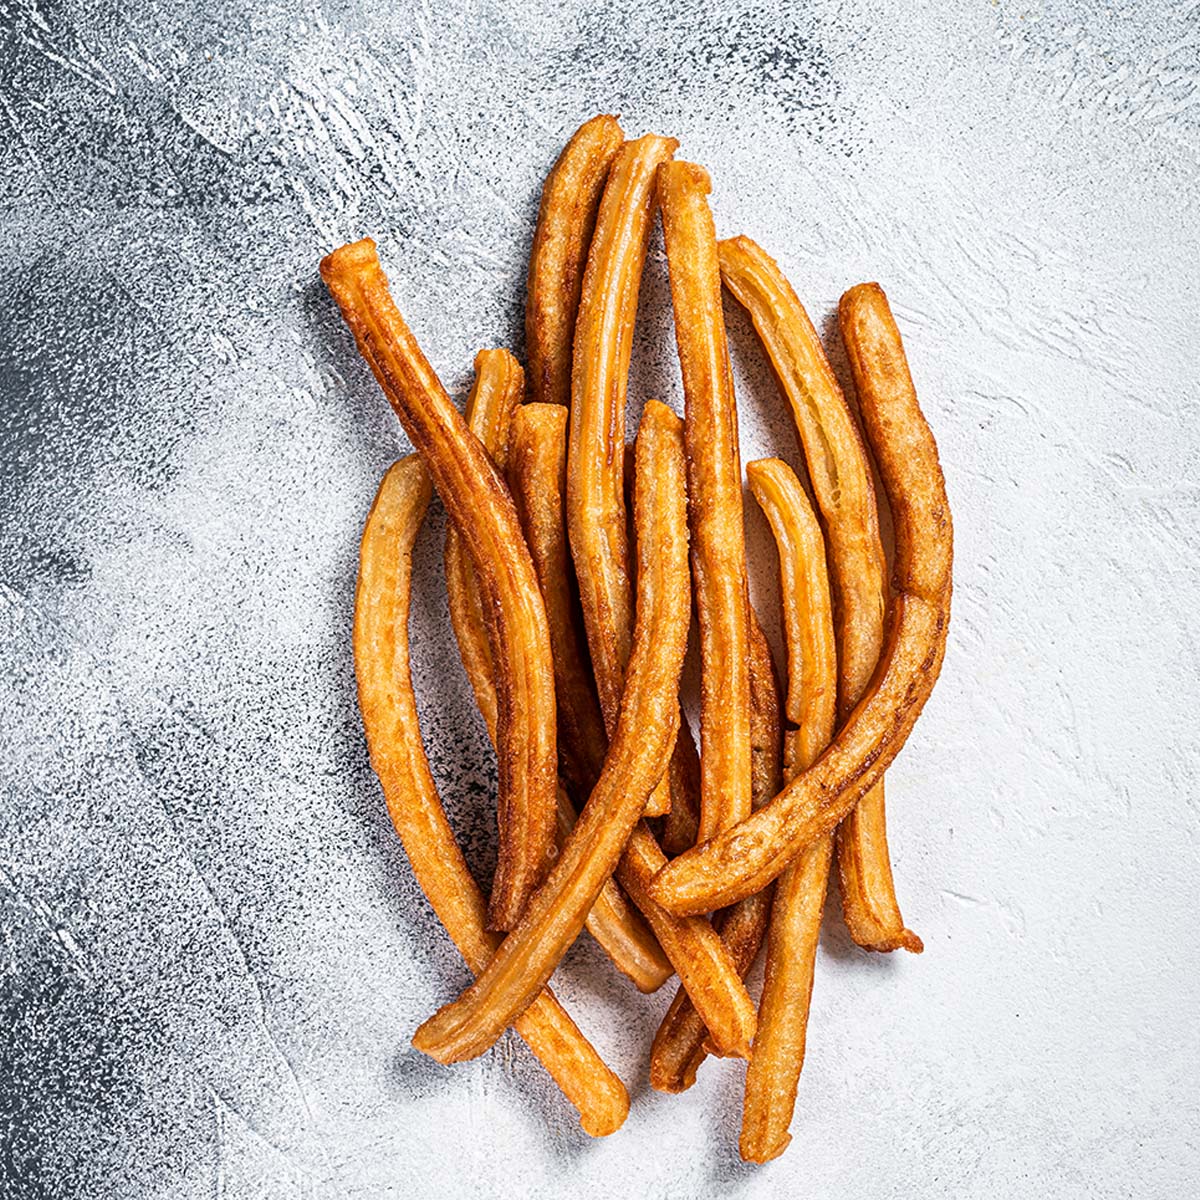 Churros are fried food. Refrying them will make them greasy, and reheating in the microwave will make them soggy. There’s a right way and a wrong way to reheat churros like any other food.